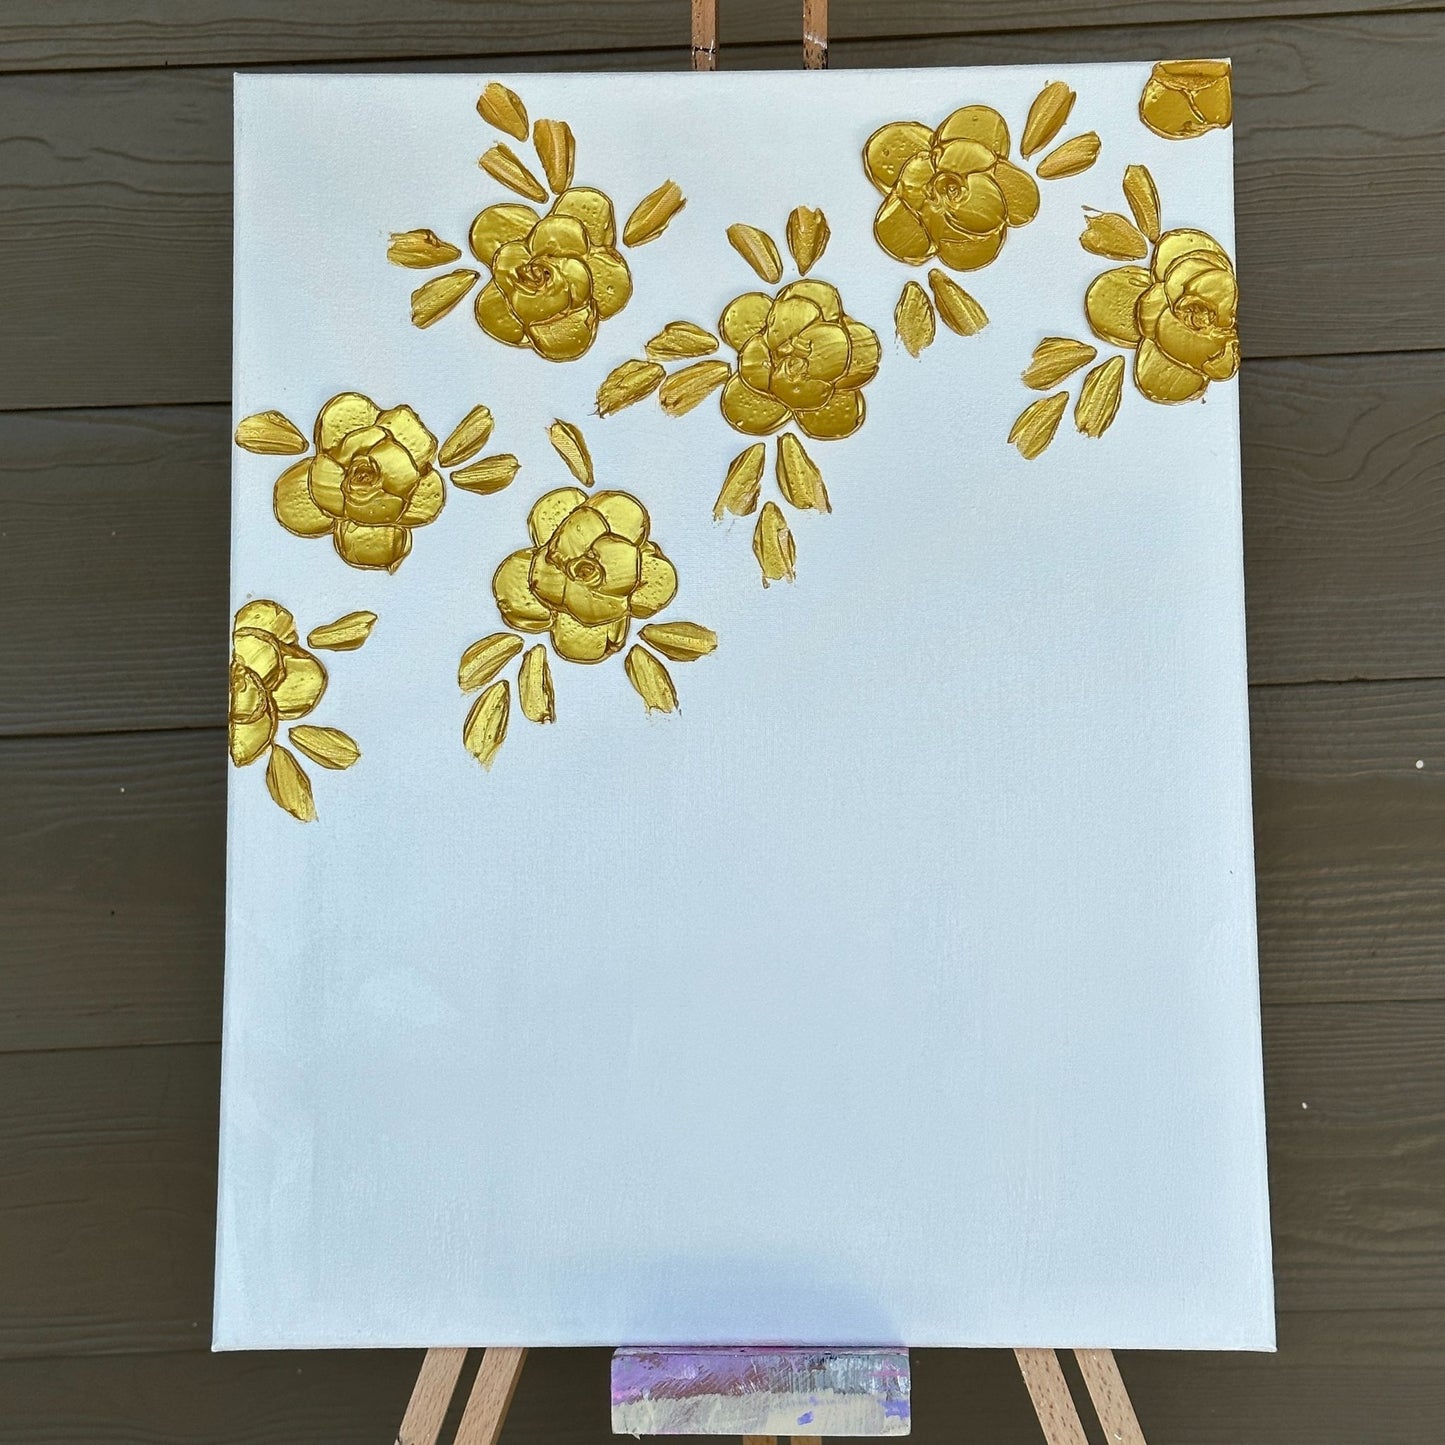 3D Texture Gold Pearl Roses on White Canvas 16"x20"